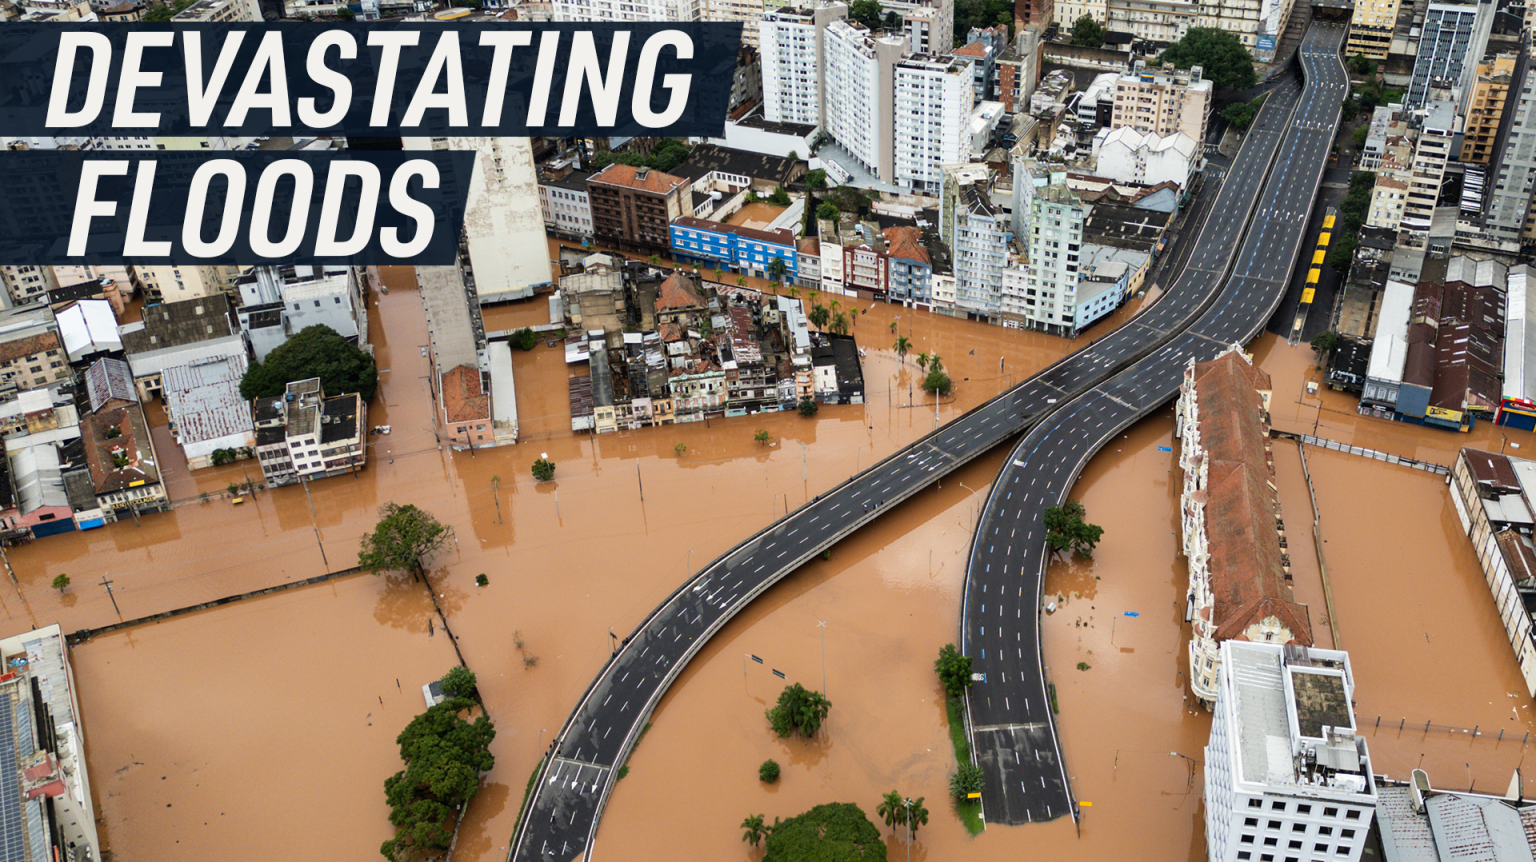 Drone footage shows an urban road submerged under water. Caption reads: "Devastating floods"